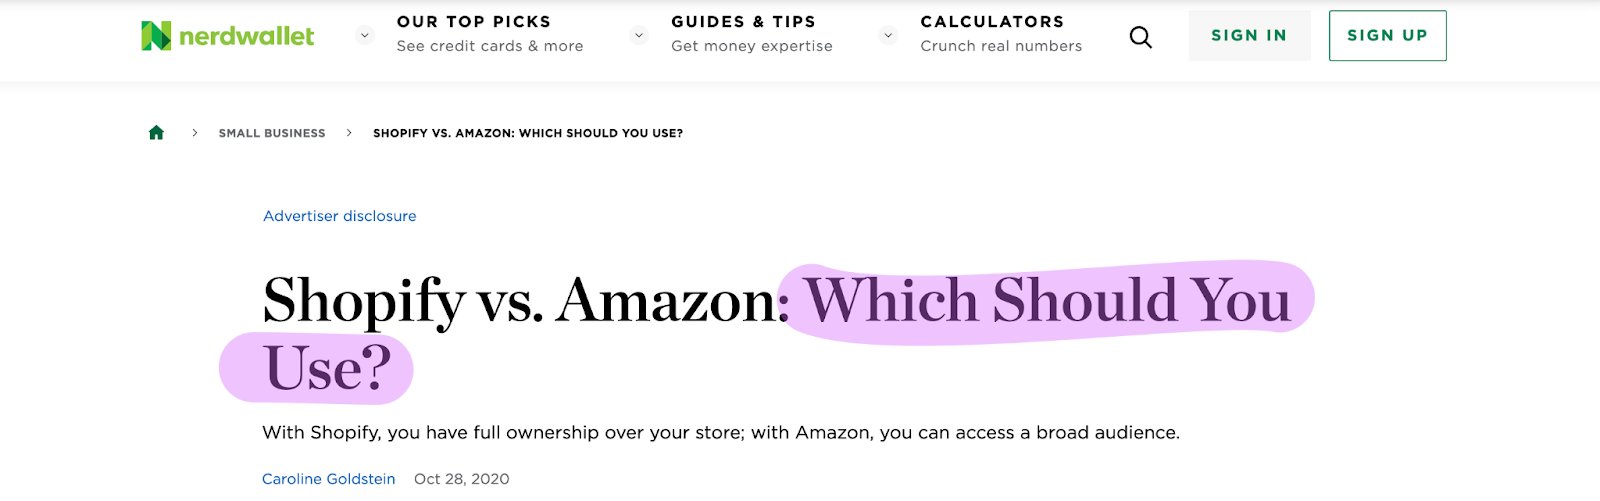 how to write product comparison posts with headline using both product names and term which should you use like this shopify vs. amazon: which should you use title